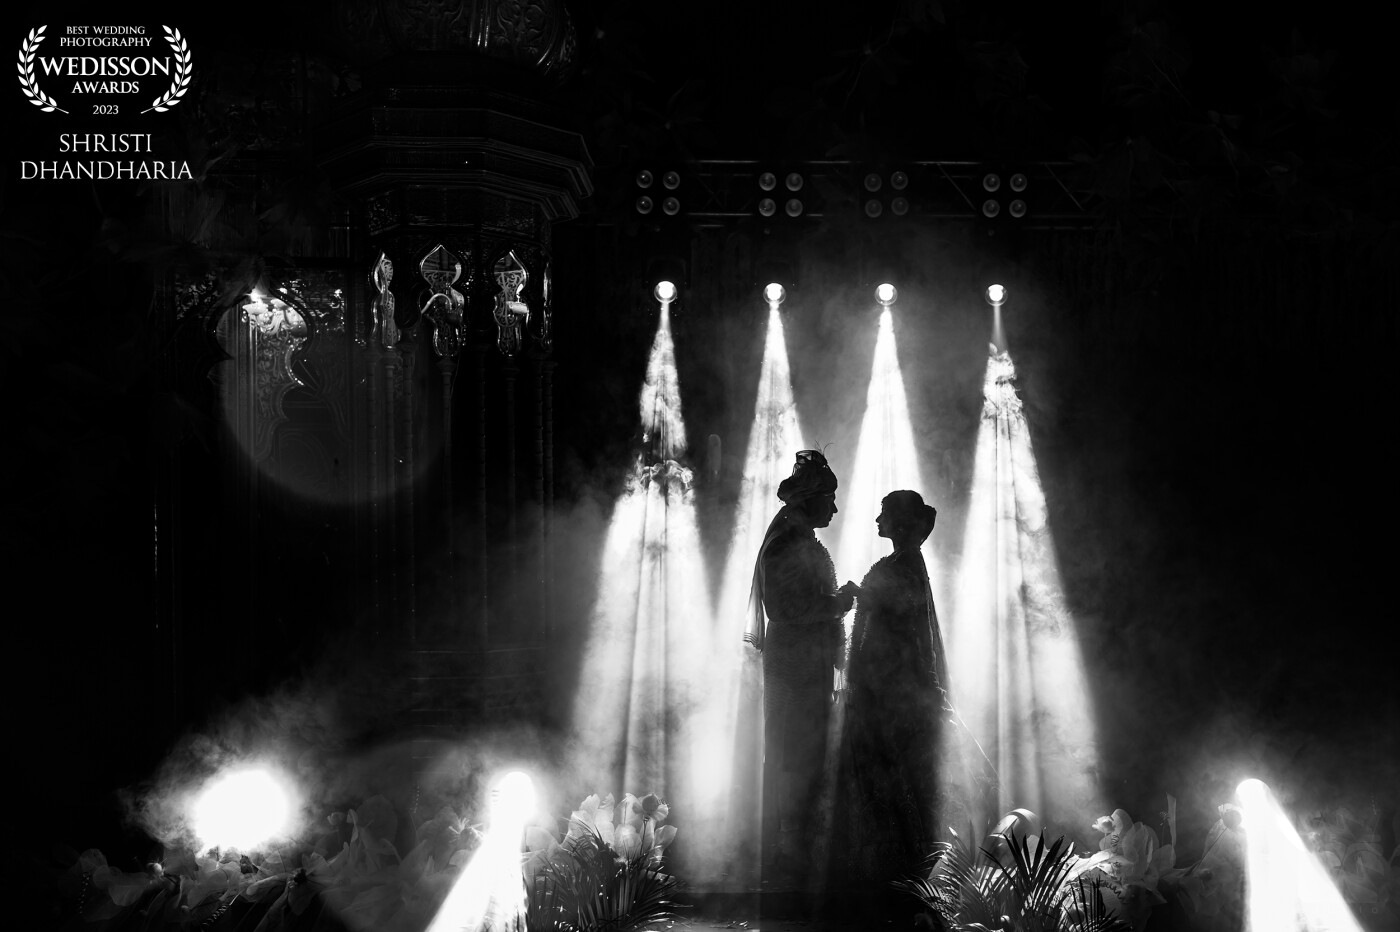 A match made in the heavens, a sight so beautifully captured that it makes the hearts melt, such was this beautiful union of these two. Among the lights showering from the sky, among the blessings of their loved ones, these two held hands forever.